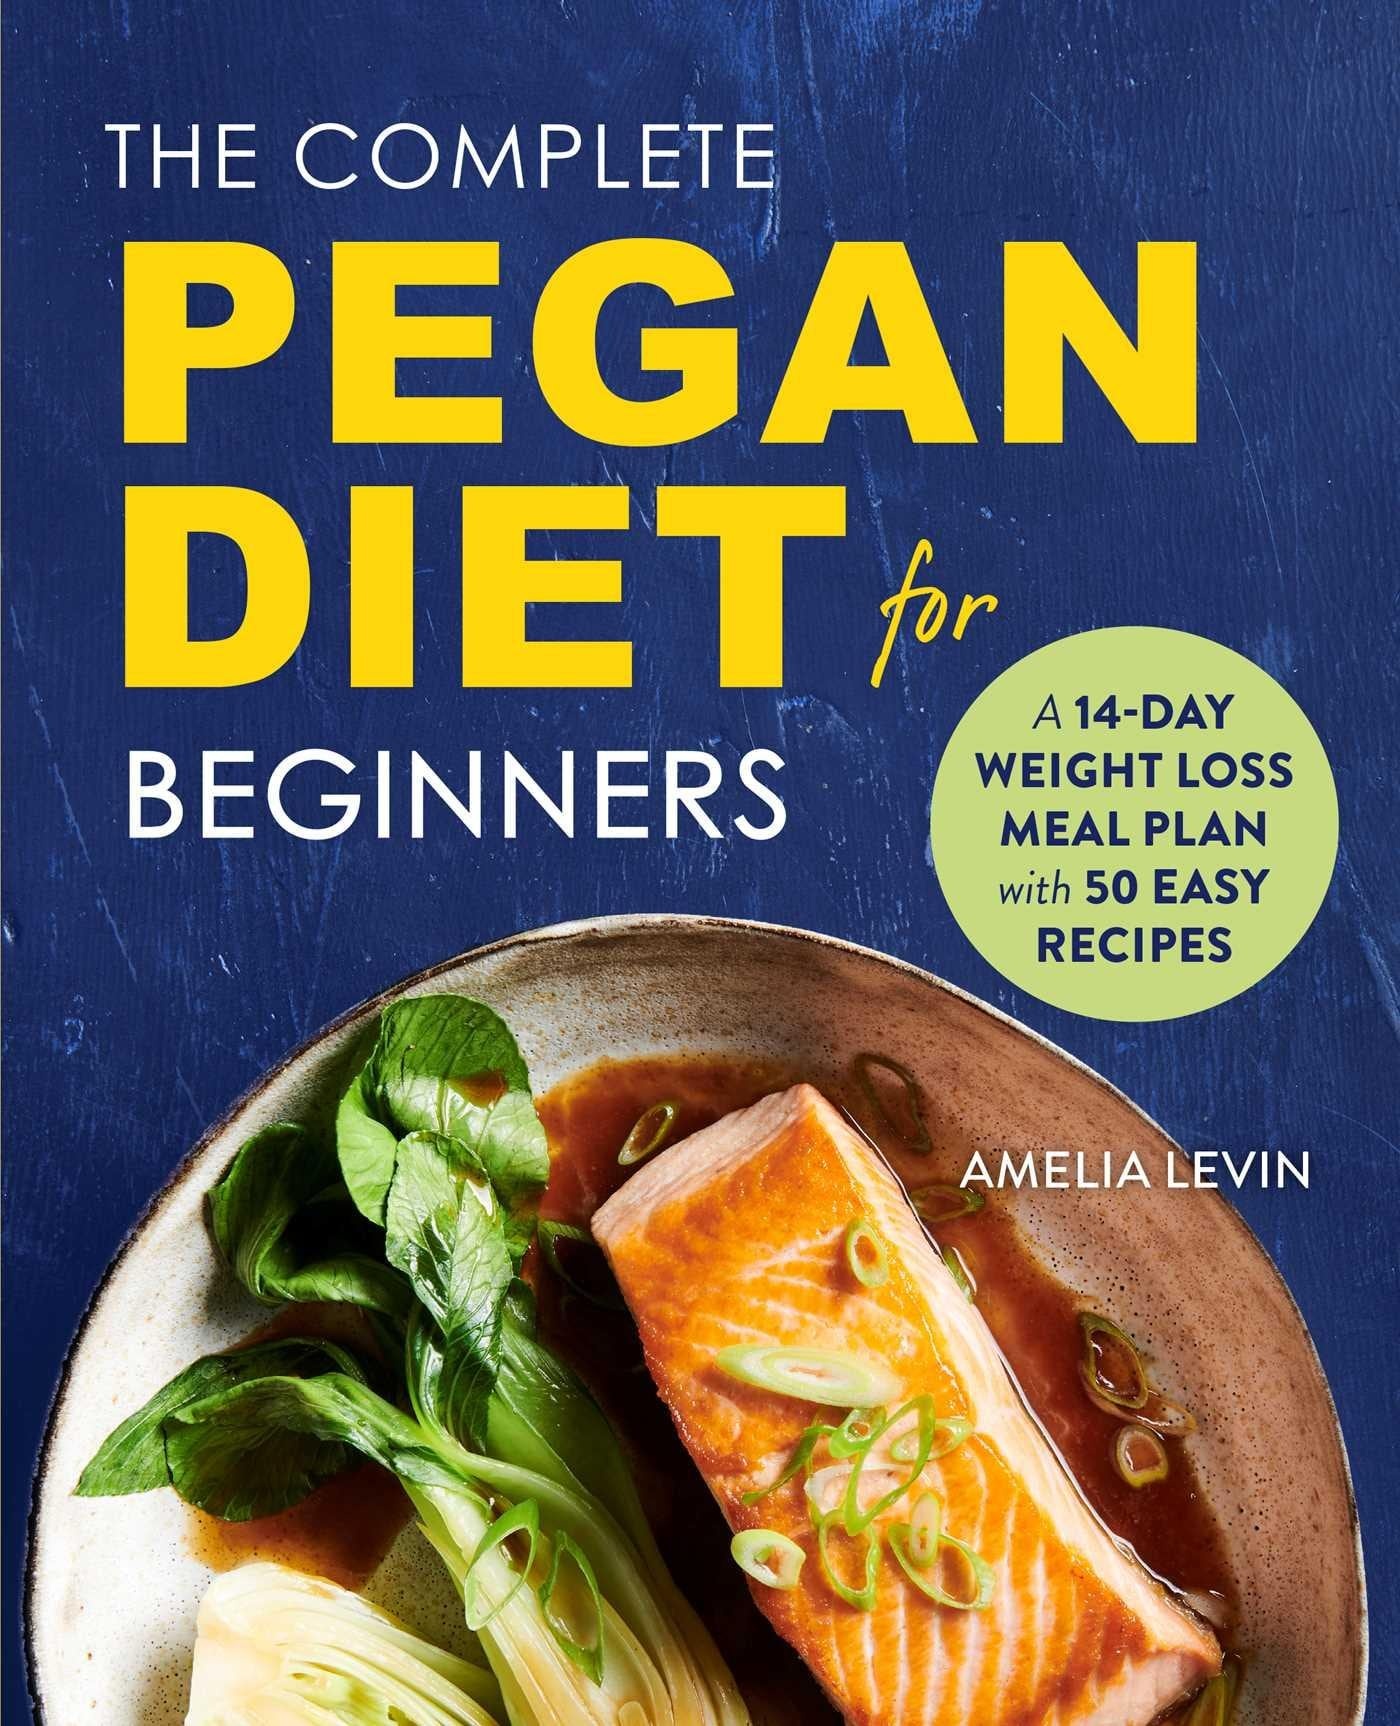 The Complete Pegan Diet for Beginners: A 14-Day Weight Loss Meal Plan with 50 Easy Recipes, Ratgeber von Amelia Levin